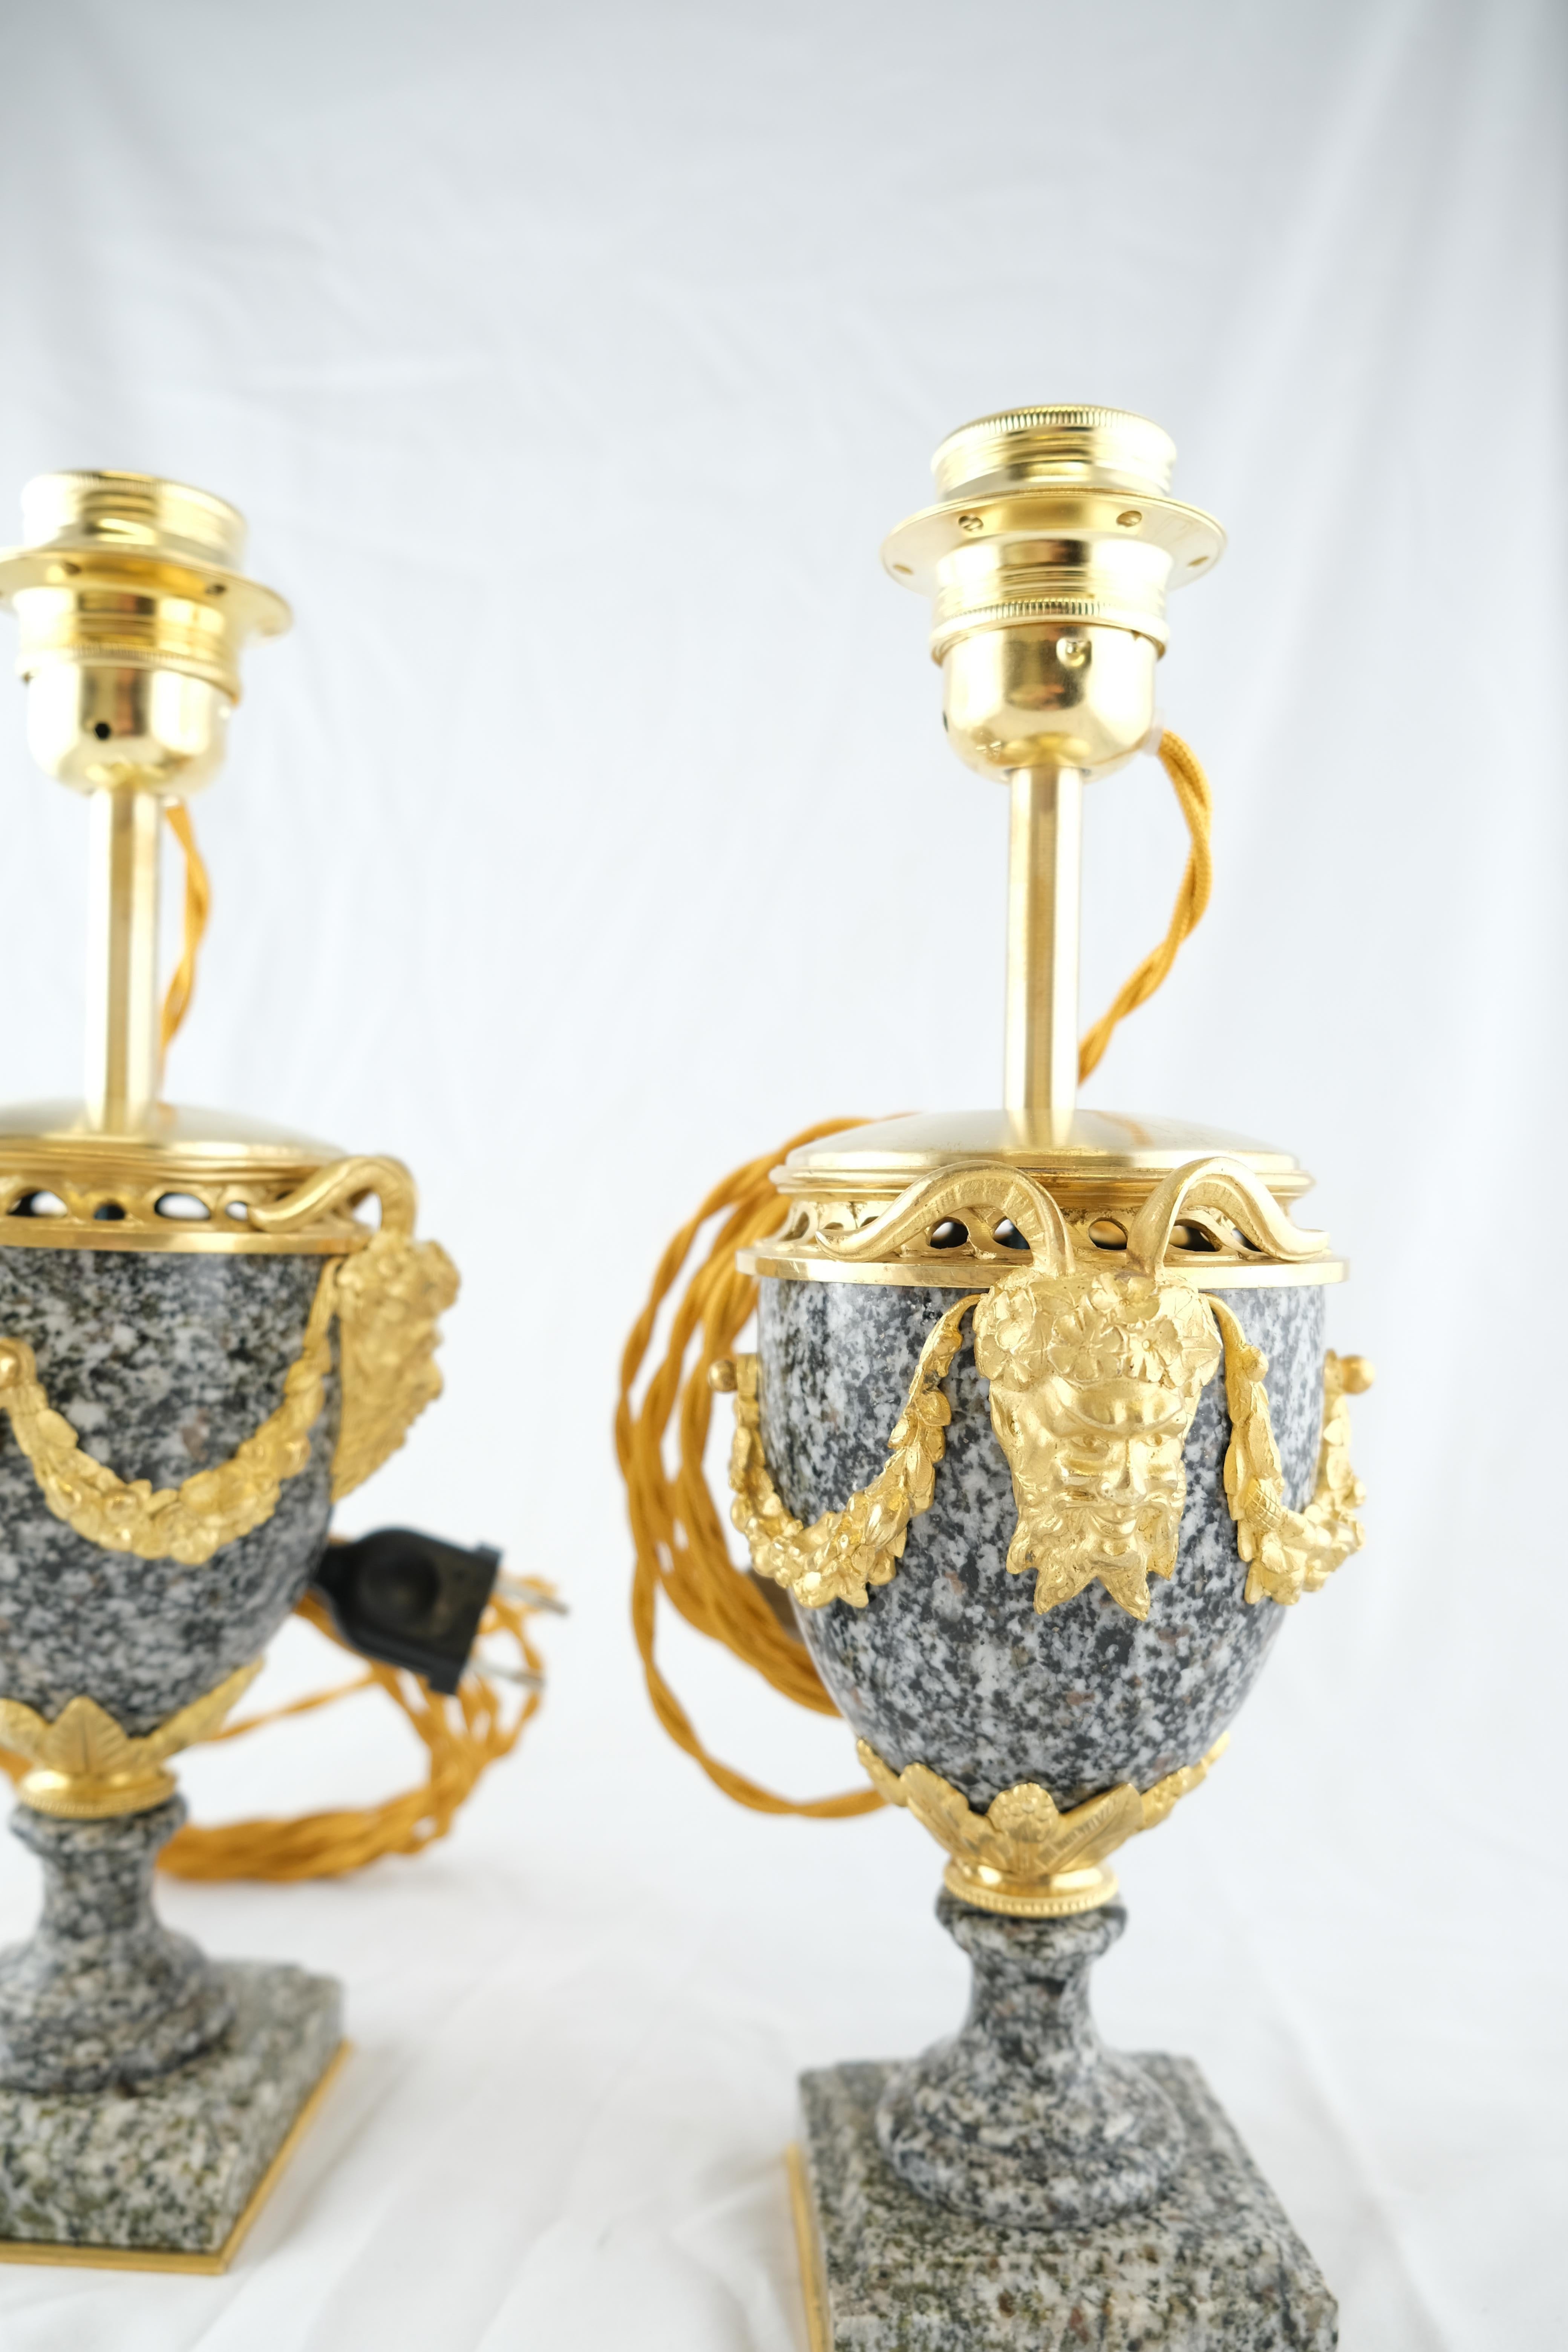 French Pair of Antique Bronze Mounted Granite Urns Mounted as Lamps, Louix Xvl Style For Sale